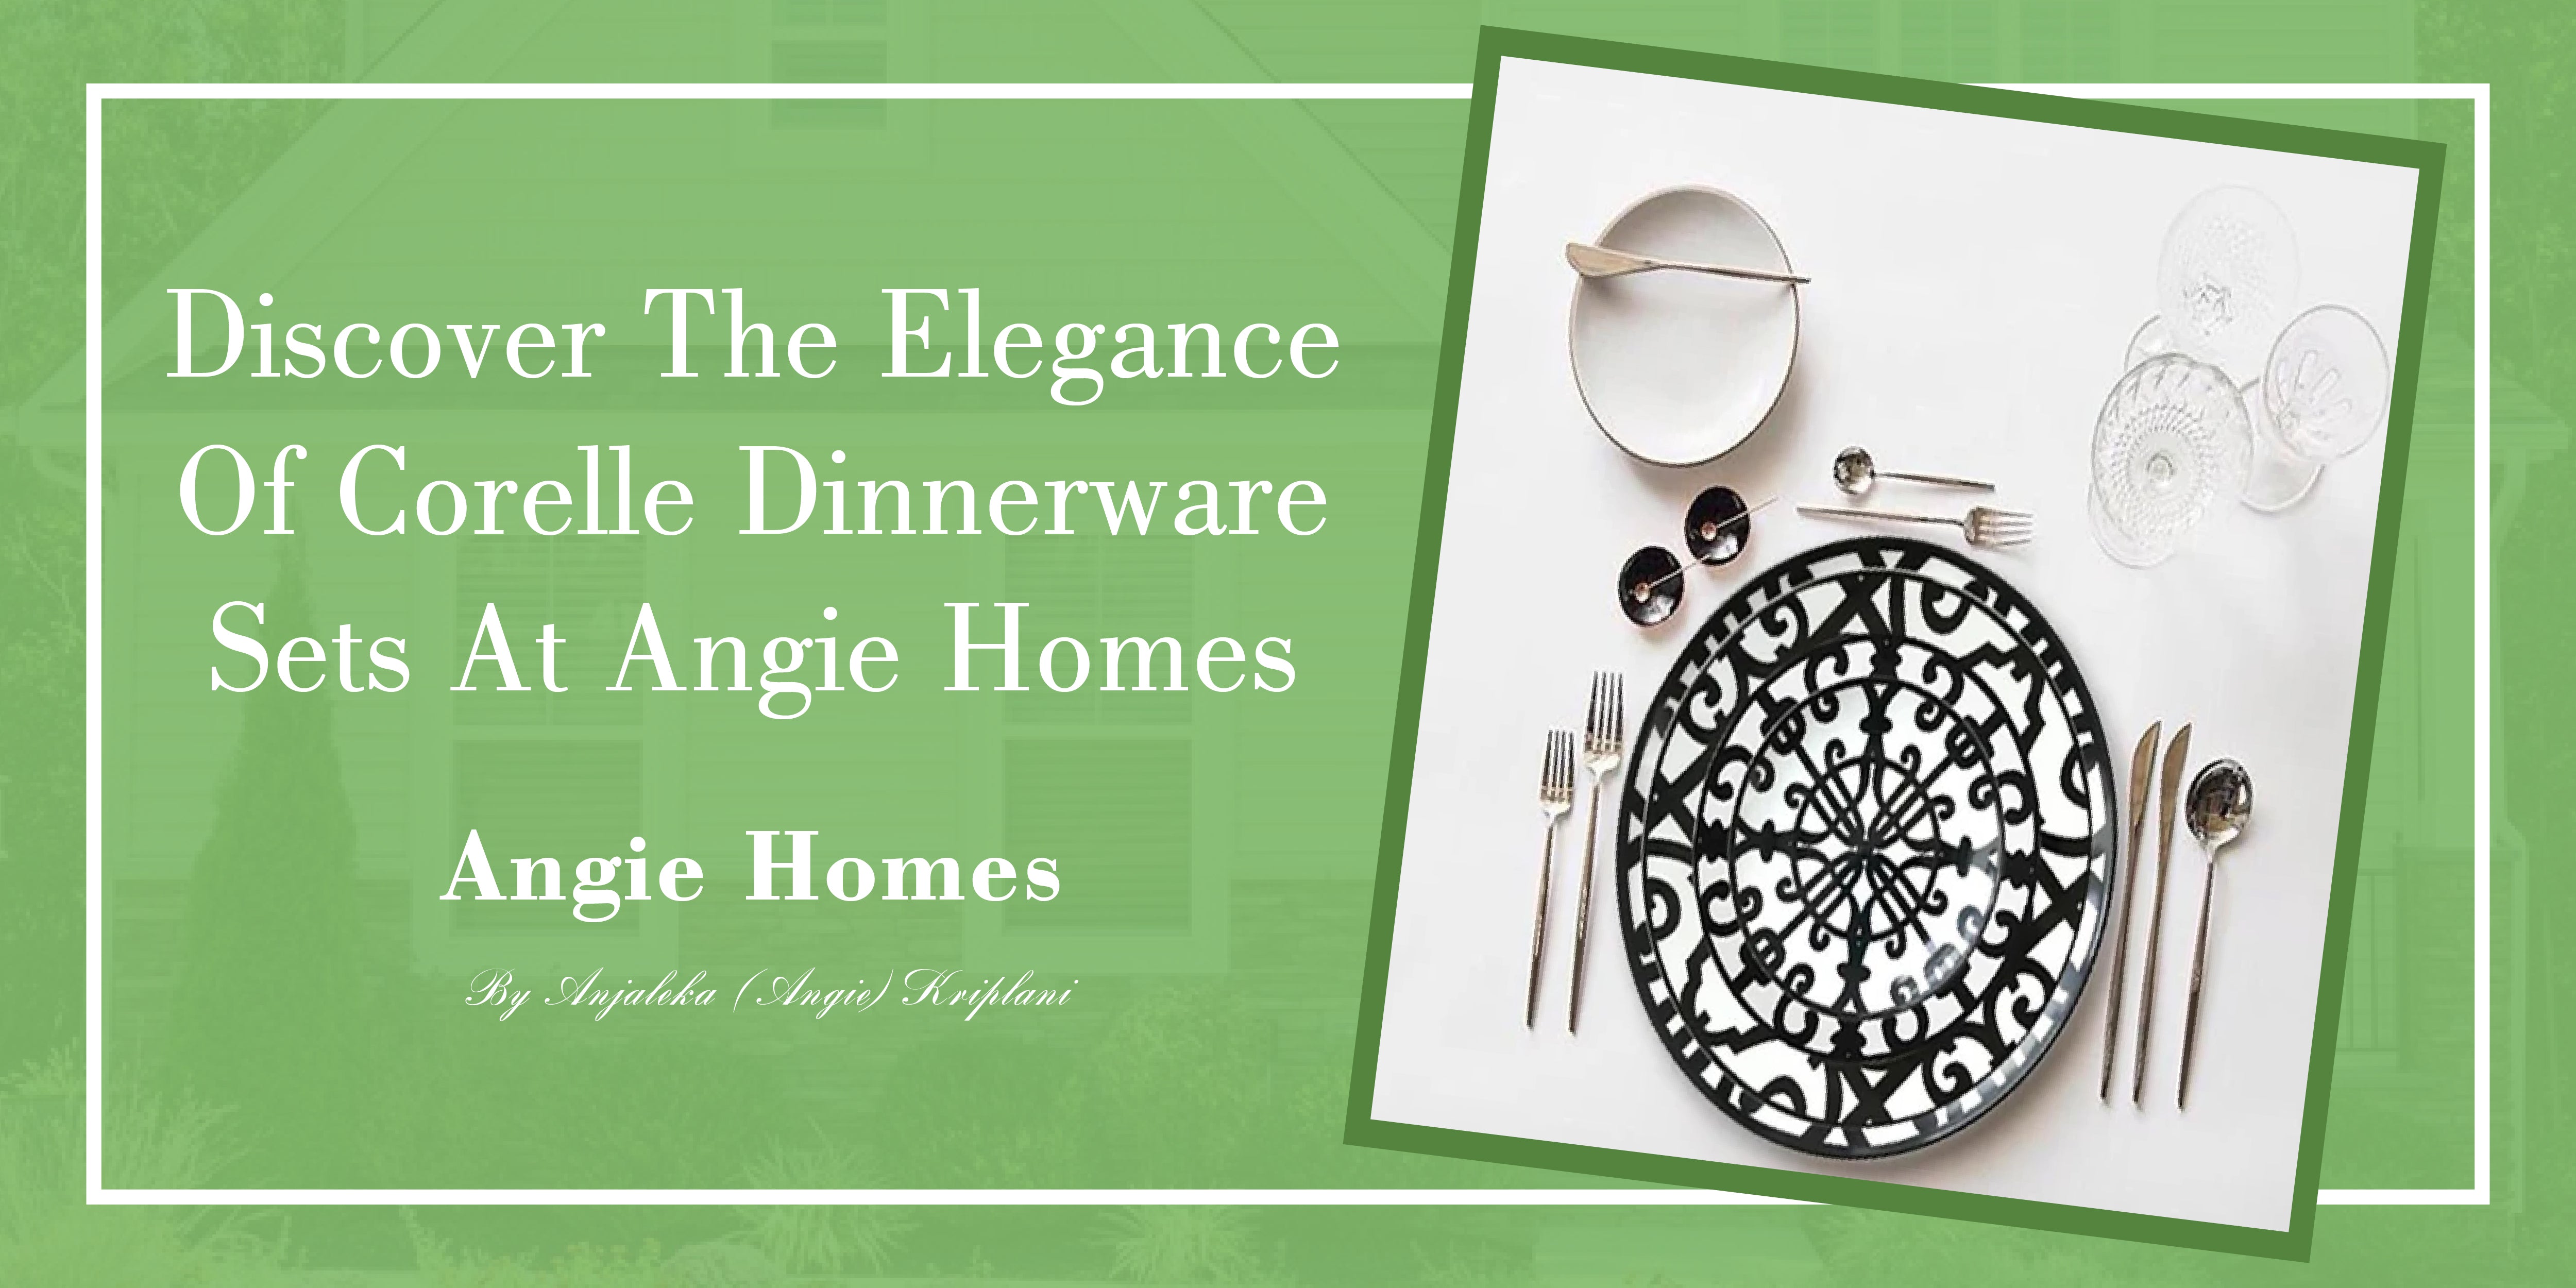 Discover the Elegance of Corelle Dinnerware Sets at Angie Homes